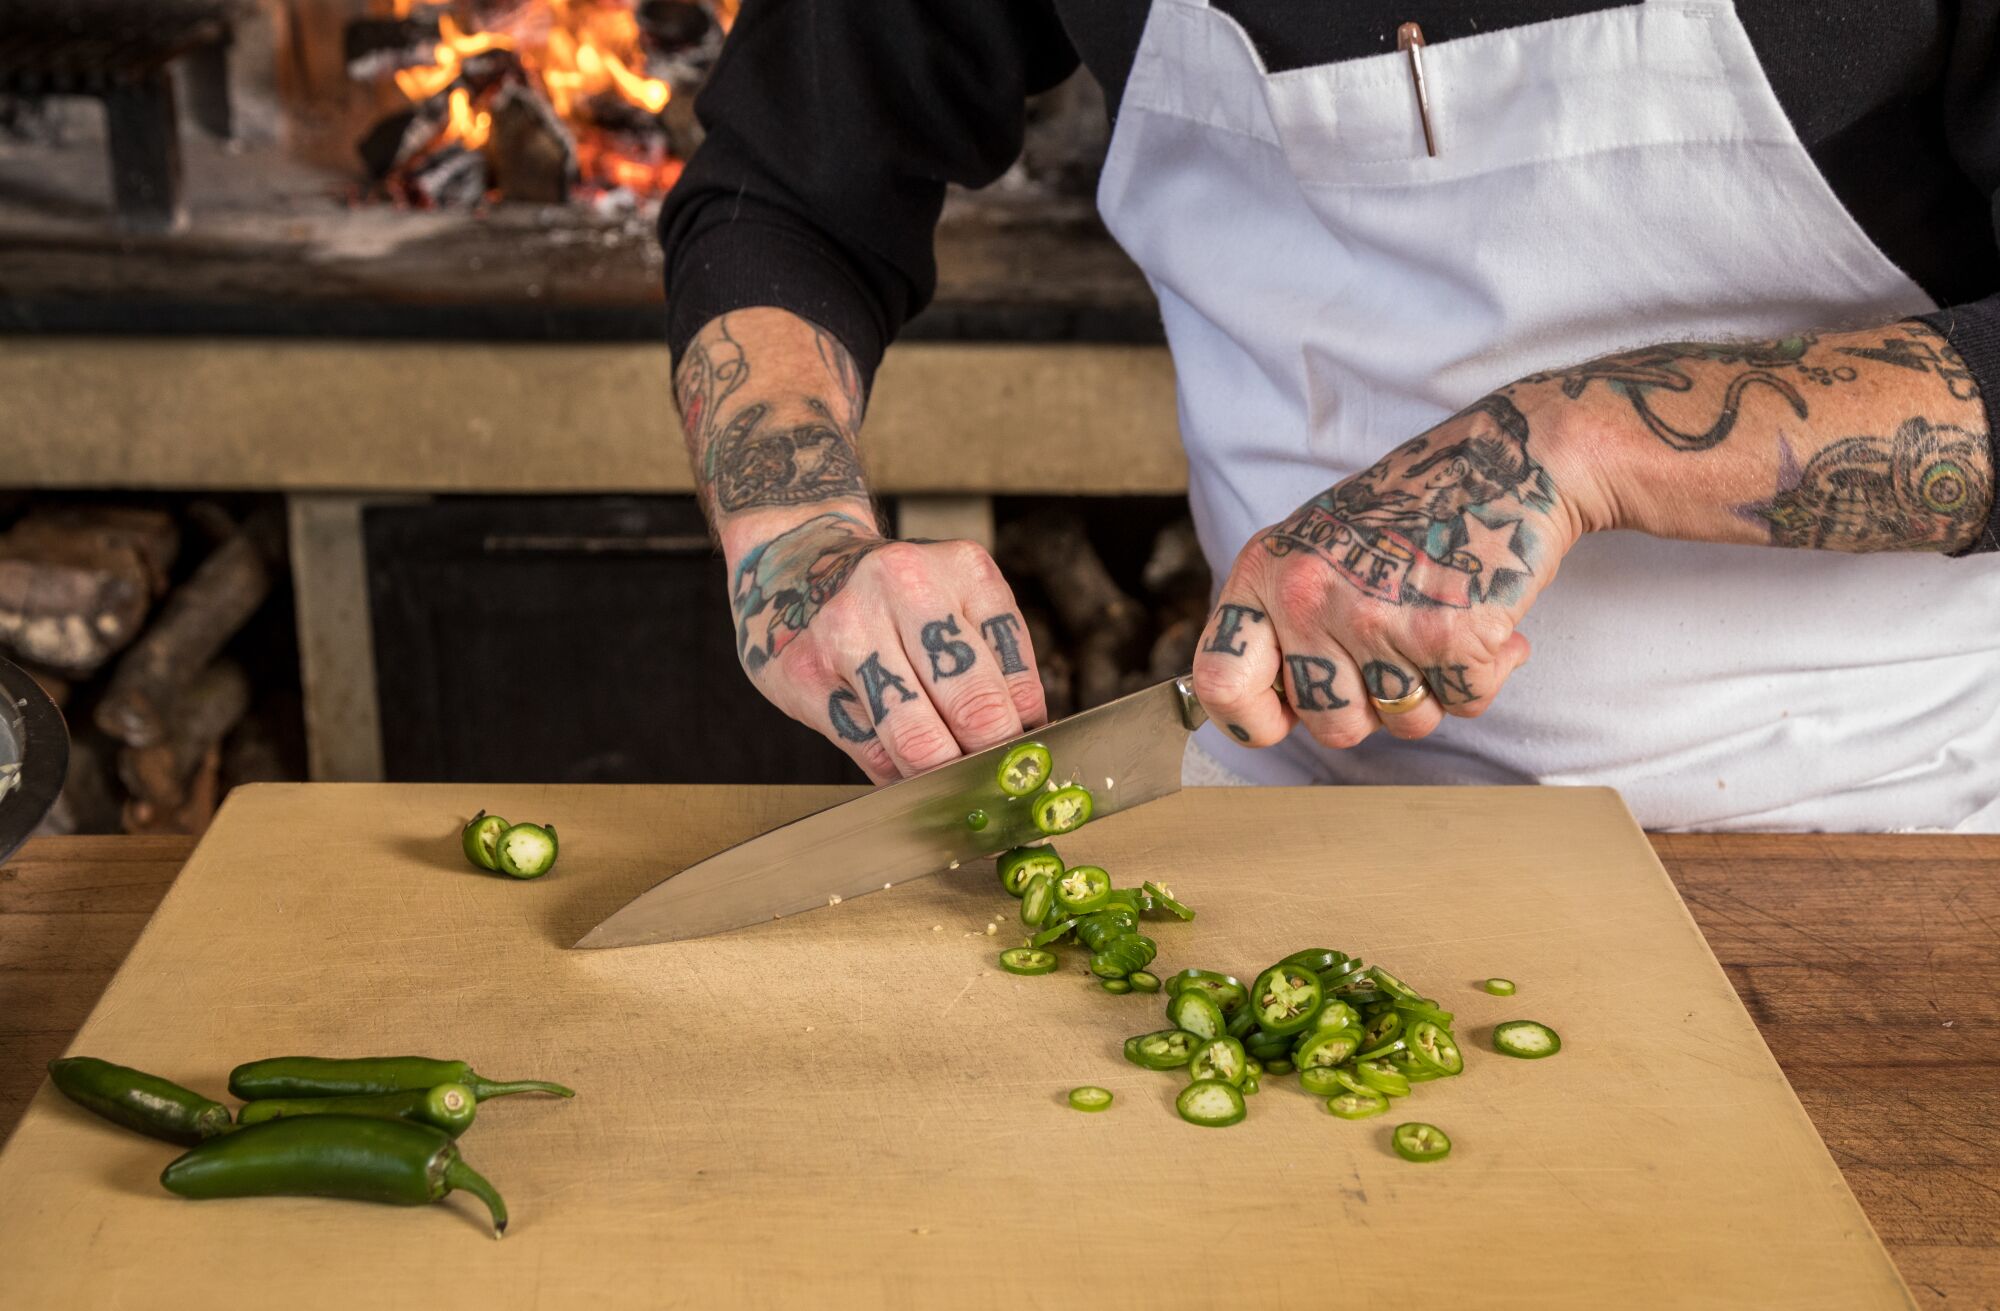 A pair of tattooed hands chops green chilis.